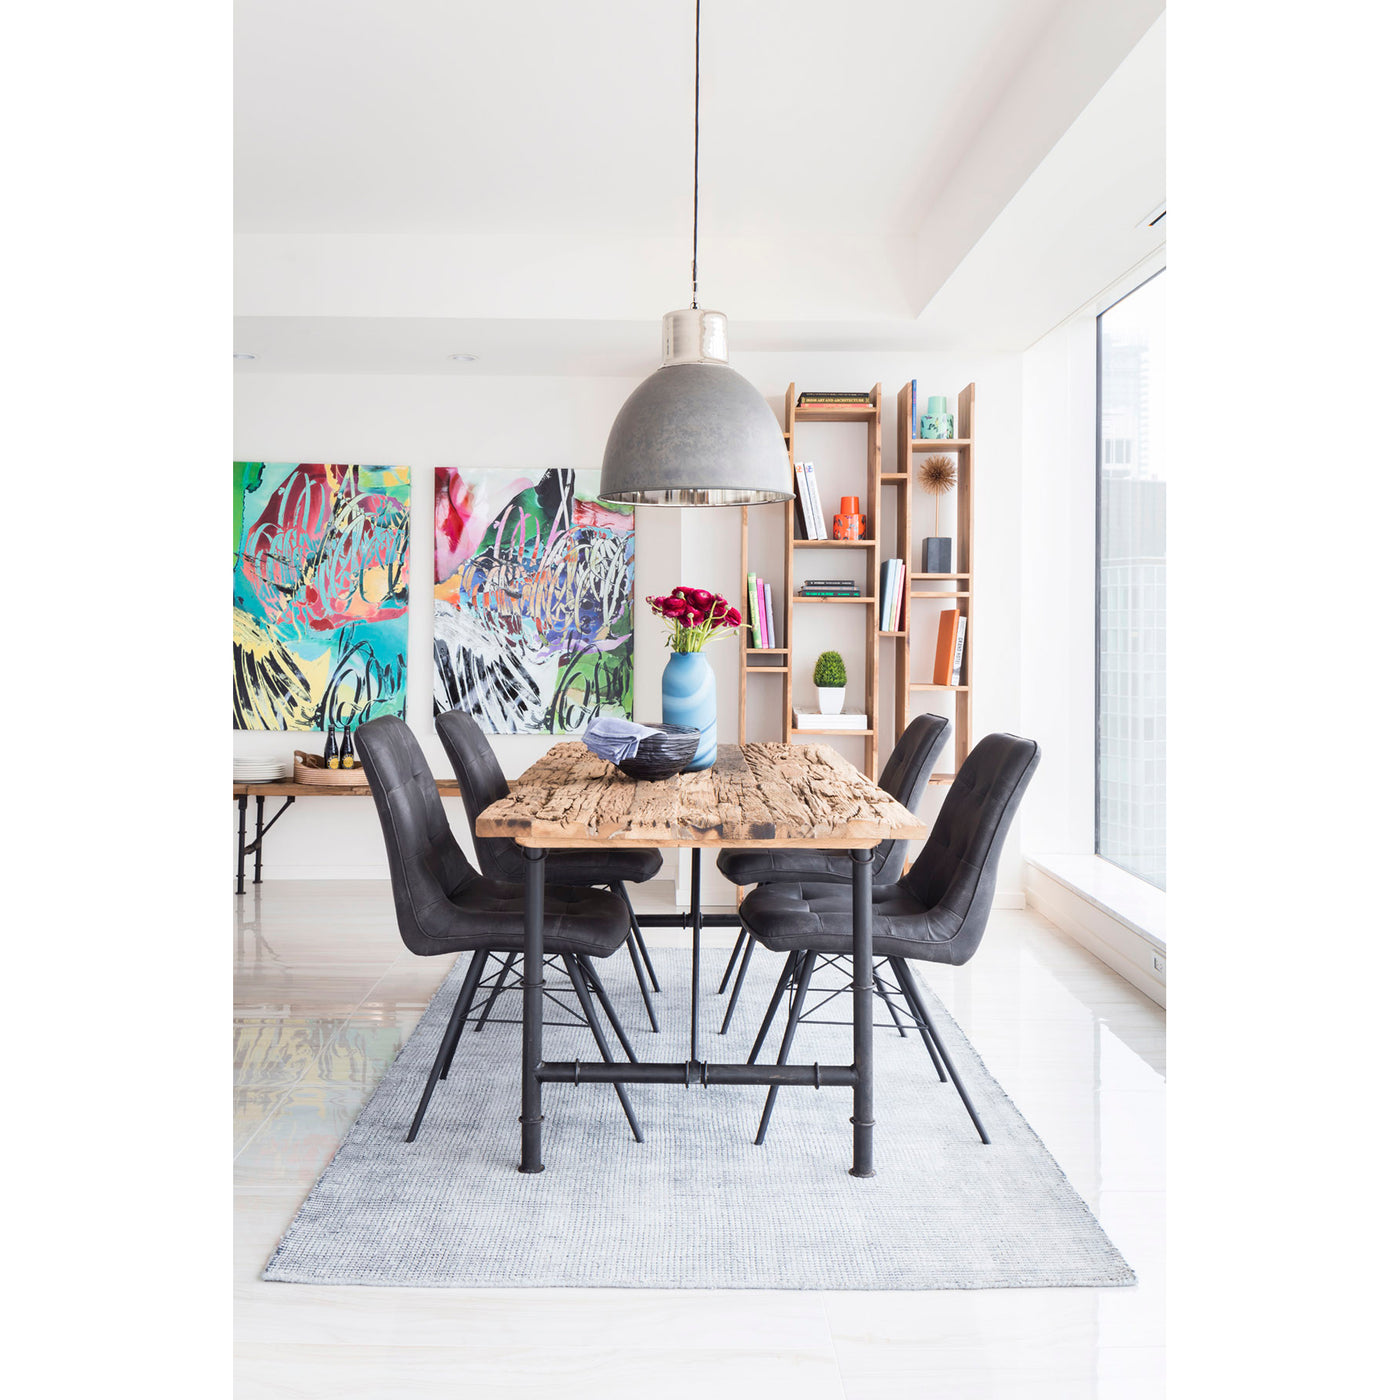 The Morrison is a sleek dining chair design, with a comfortable padded seat for long dinners with family and friends, easy...